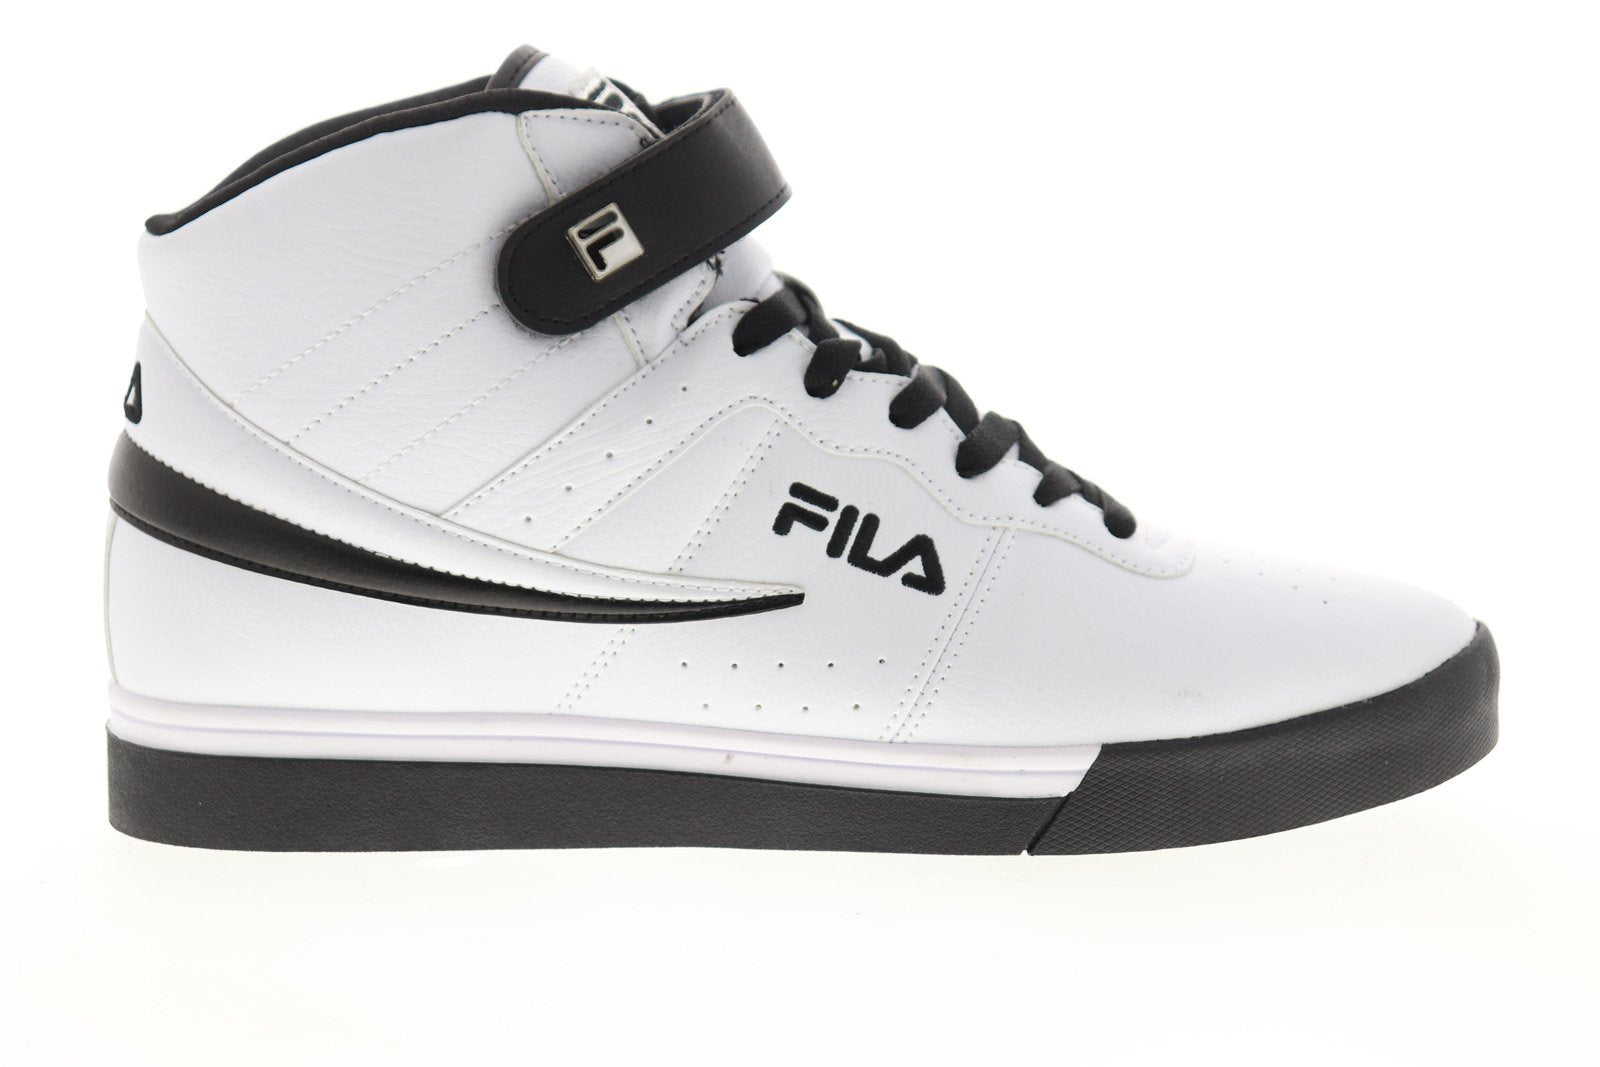 Fila Vulc 13 1SC60526-112 Mens White Synthetic Lifestyle Sneakers Shoes